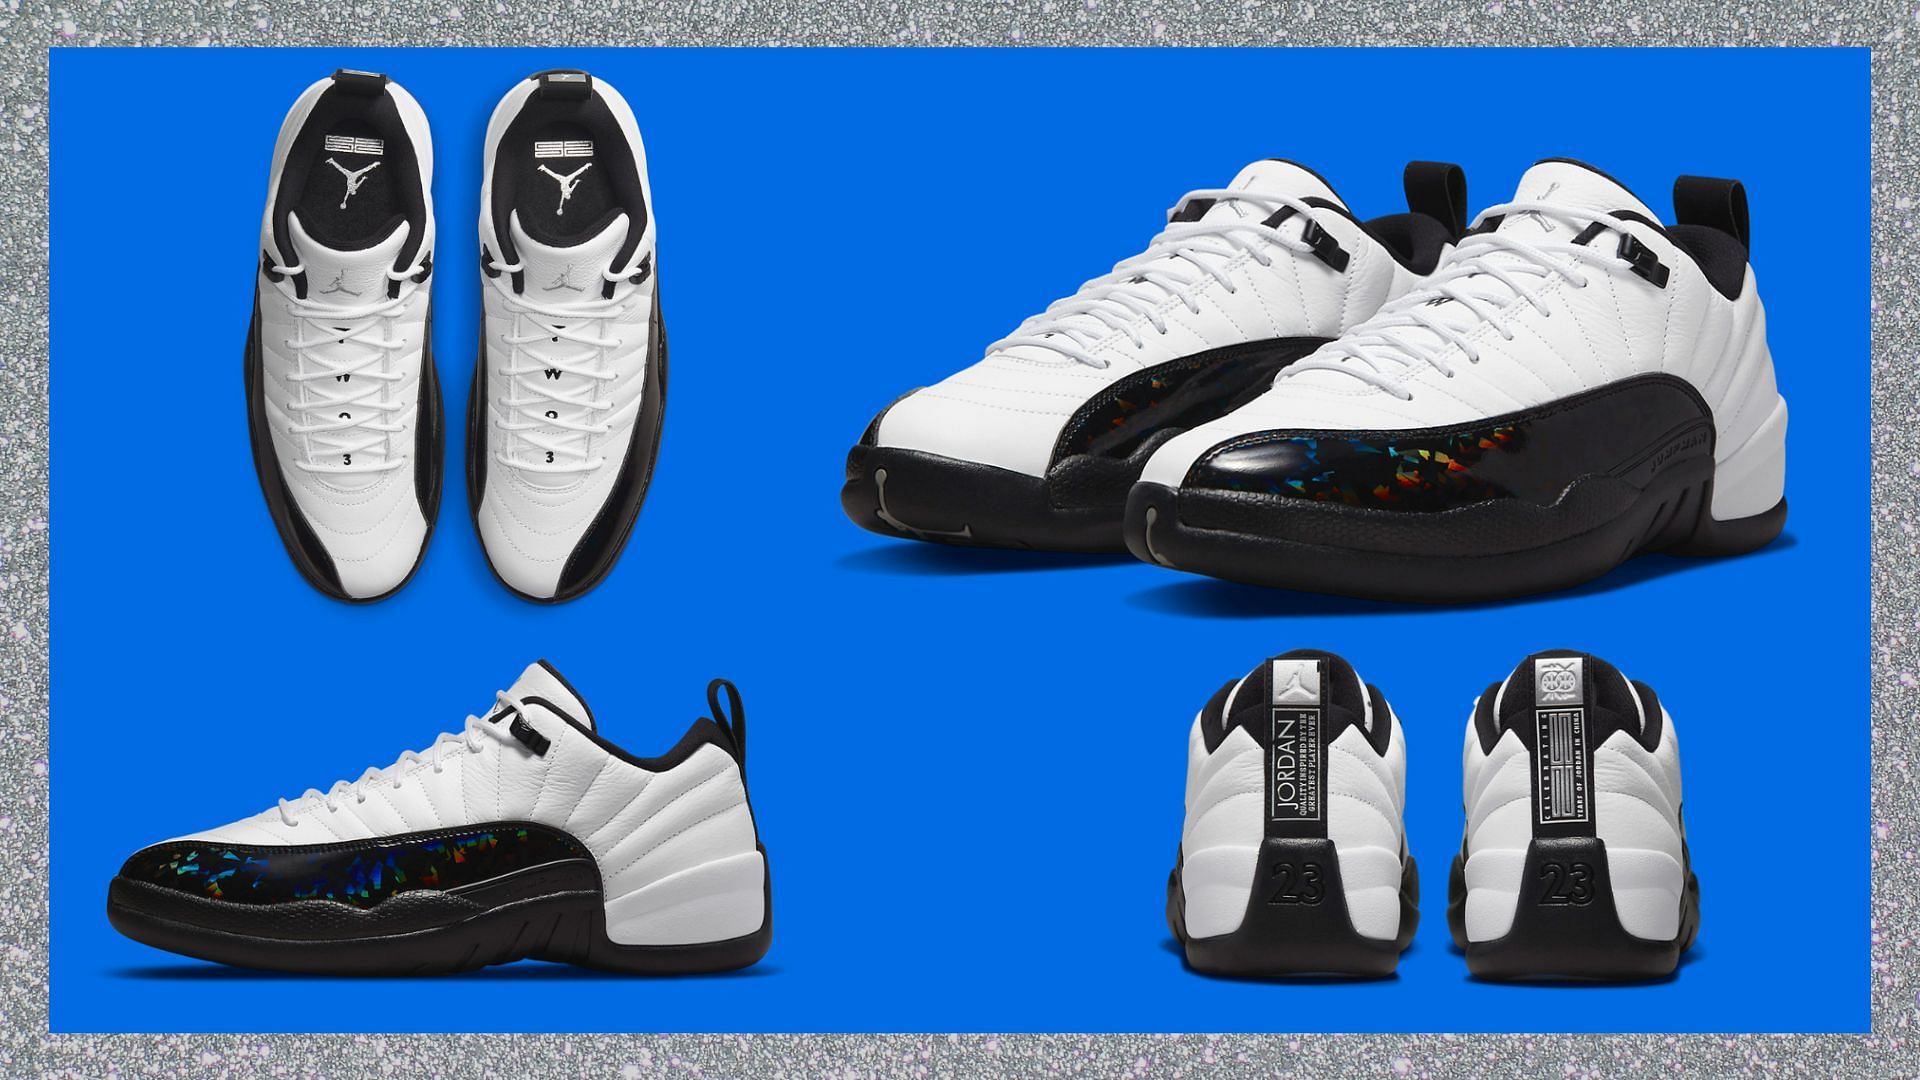 Where To Buy The Air Jordan 12 Low Greater China - Sneaker News